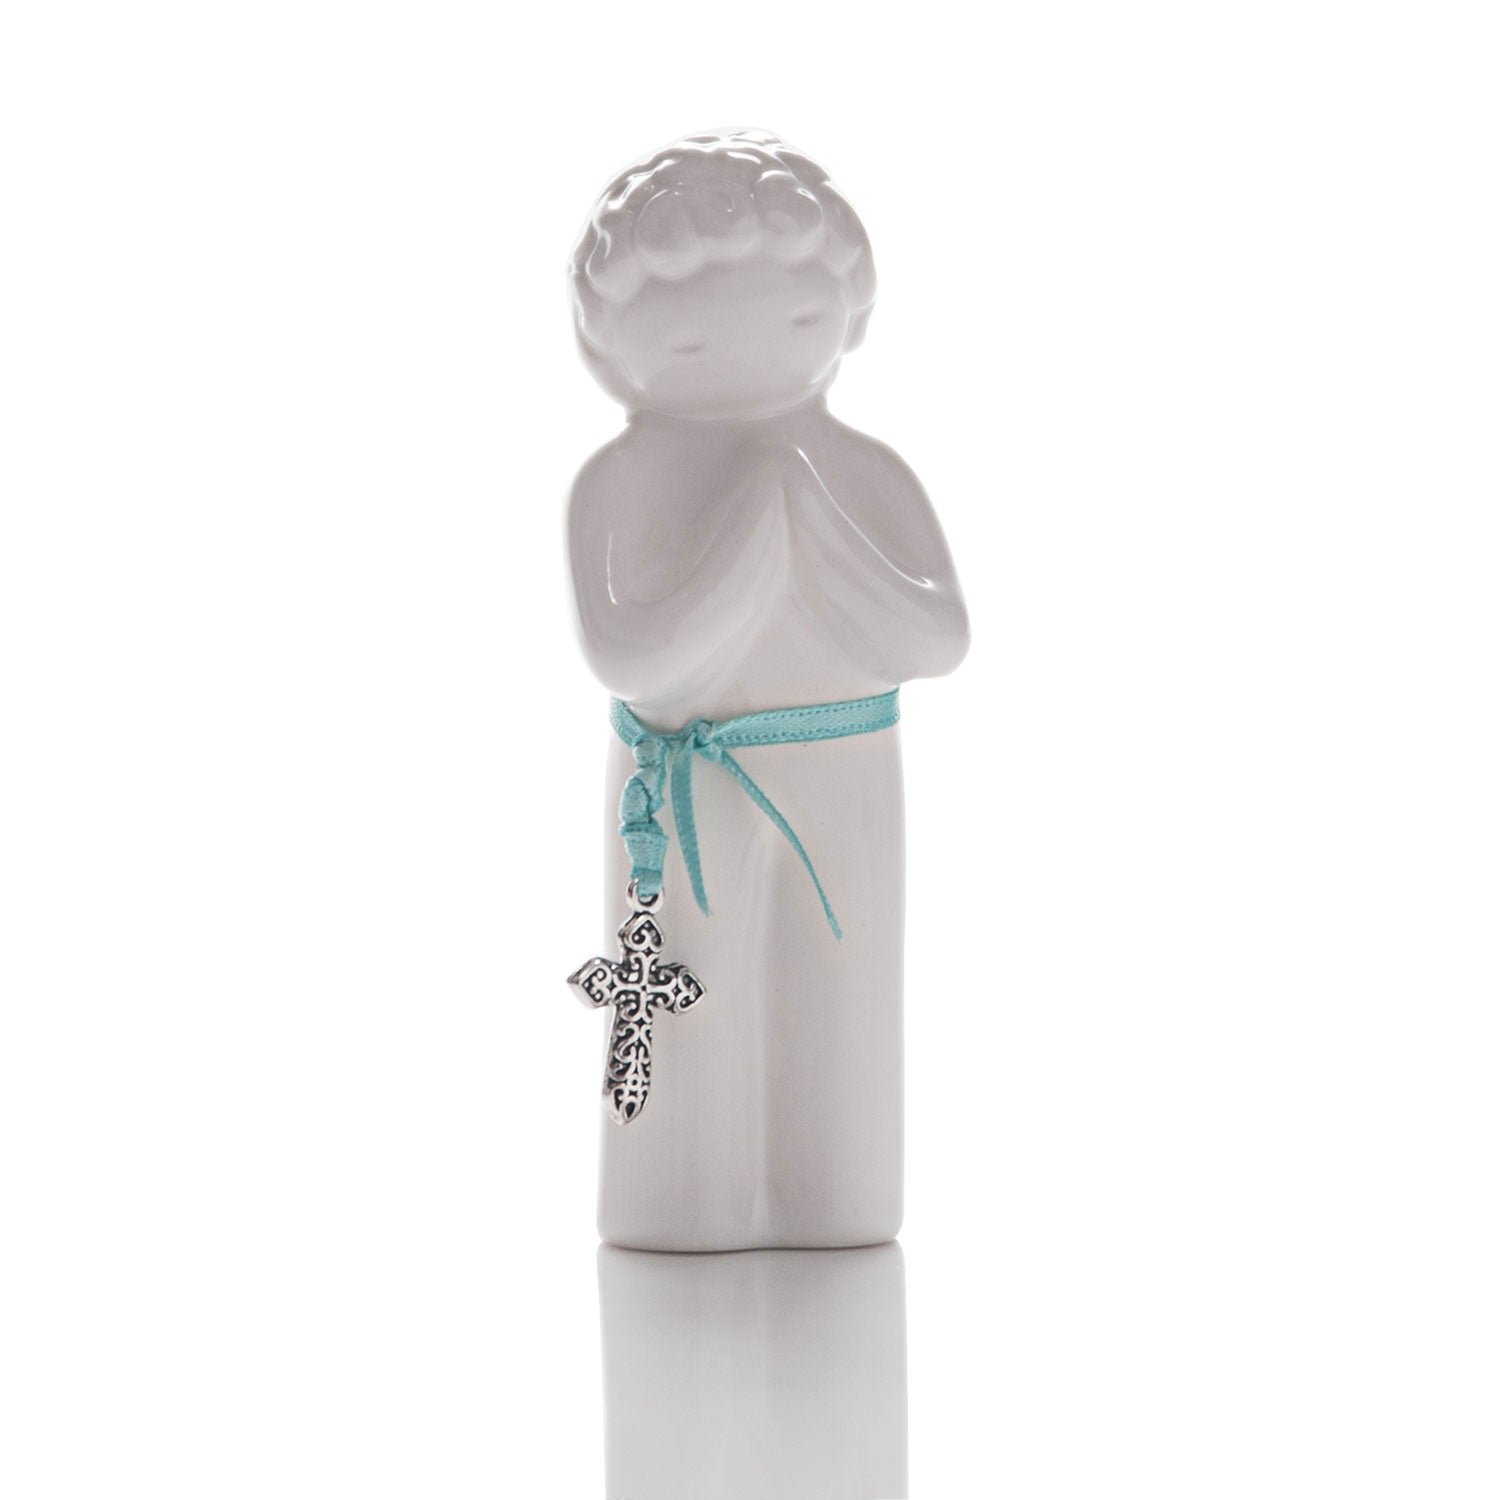 In every Catholic household in every country, the First Communion Day is one the most important dates in a child’s life.  This ceramic figurine, handmade with sustainable materials, is the sweetest way of live up to that date and it’s a tangible way of honoring faith, being a meaningful reminder of not only a day so joyful but also of your presence in it.